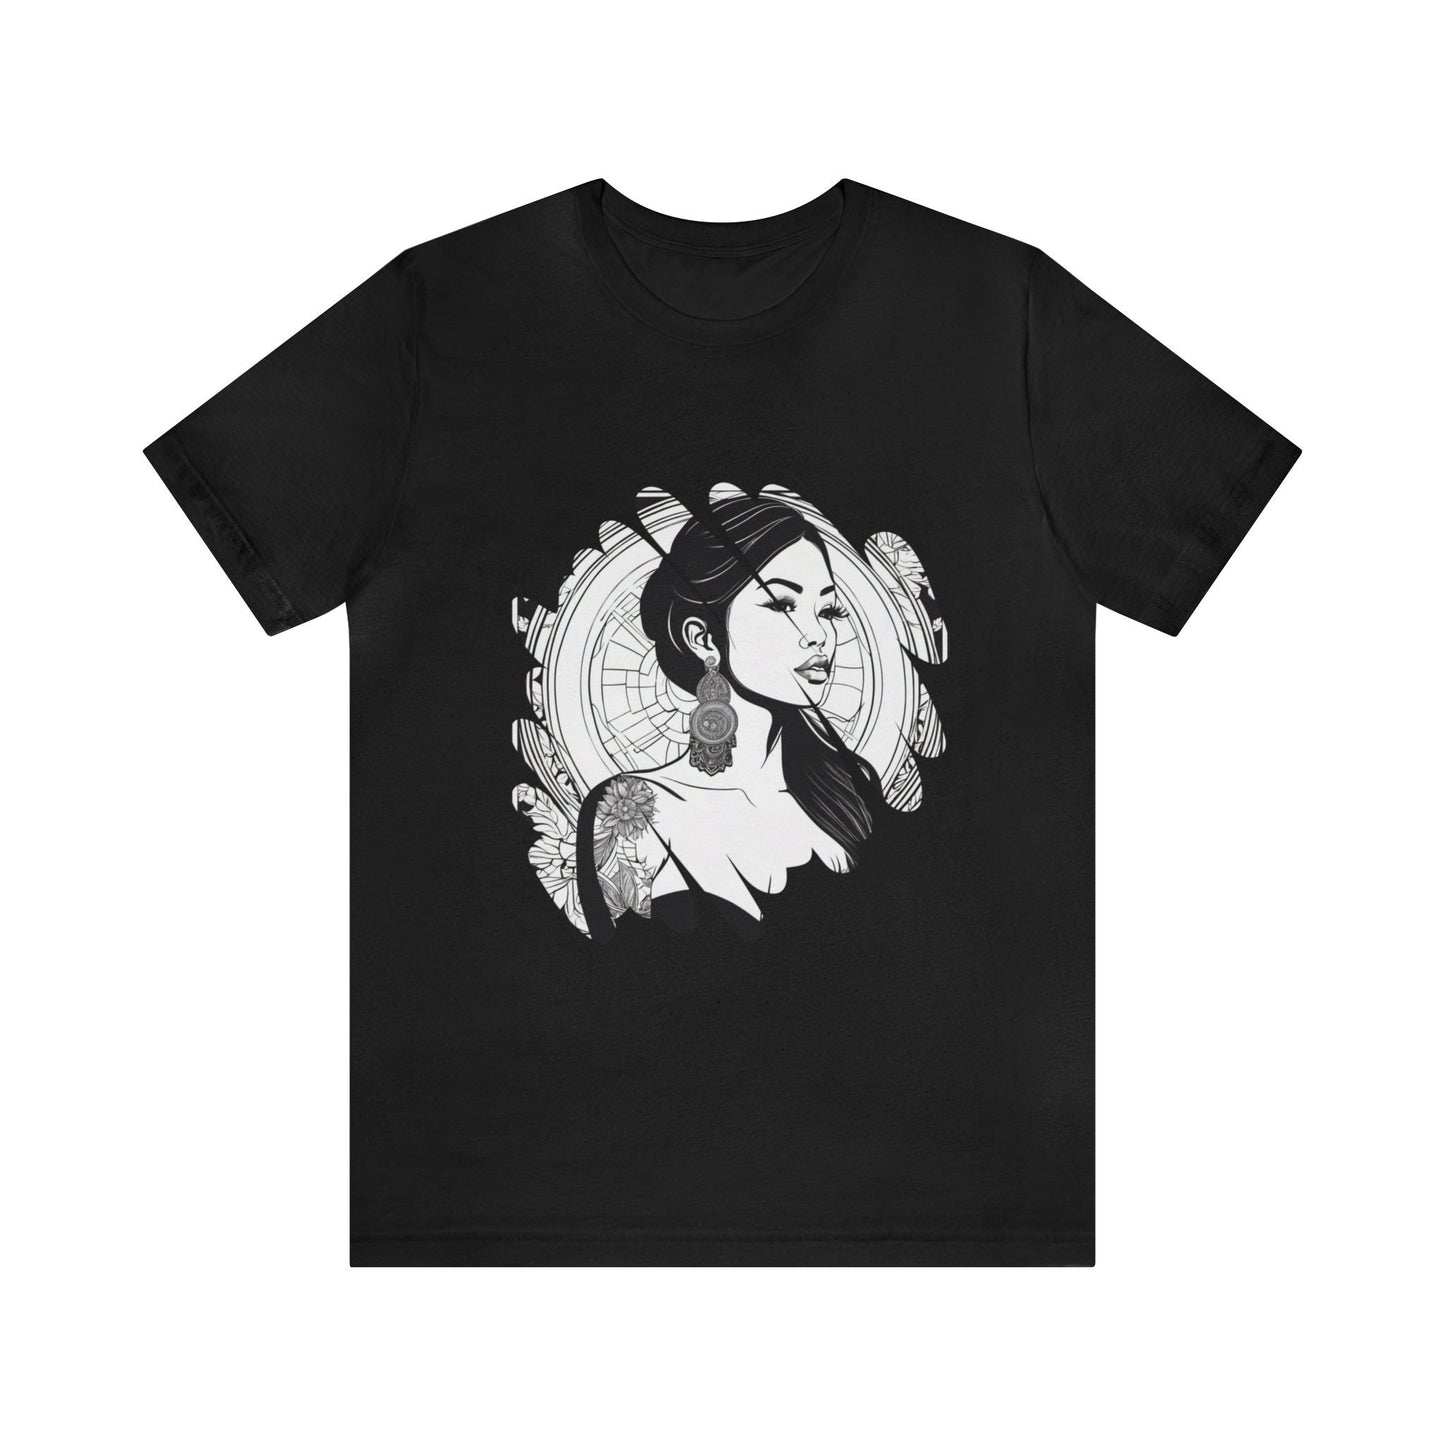 Melinda Tattoo Pin-Up Girl Short Sleeve Tee Perfect Gift for Men and Women